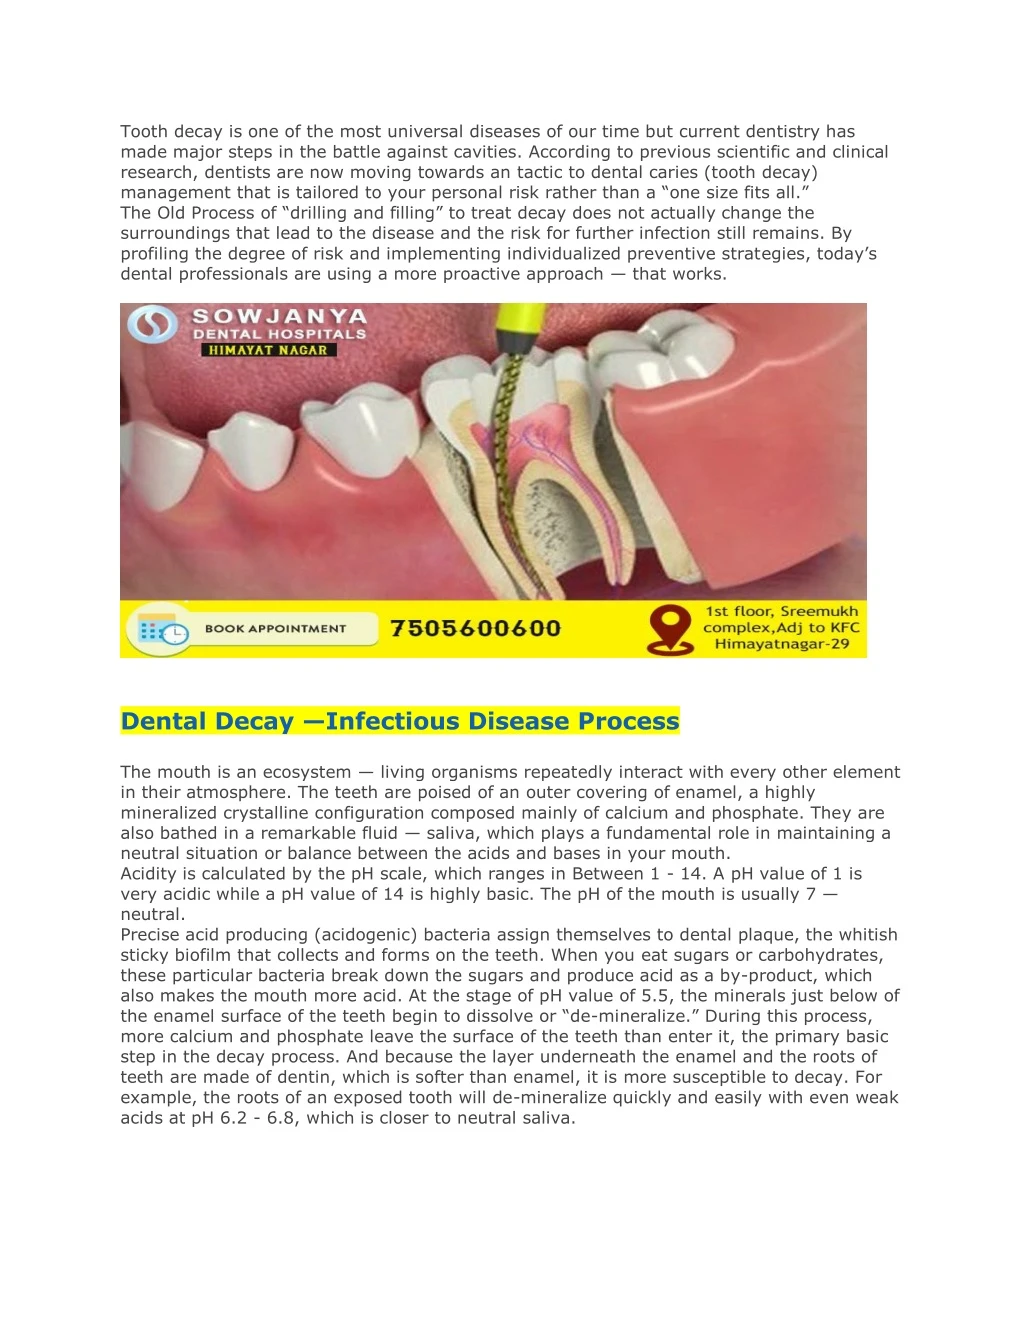 tooth decay is one of the most universal diseases